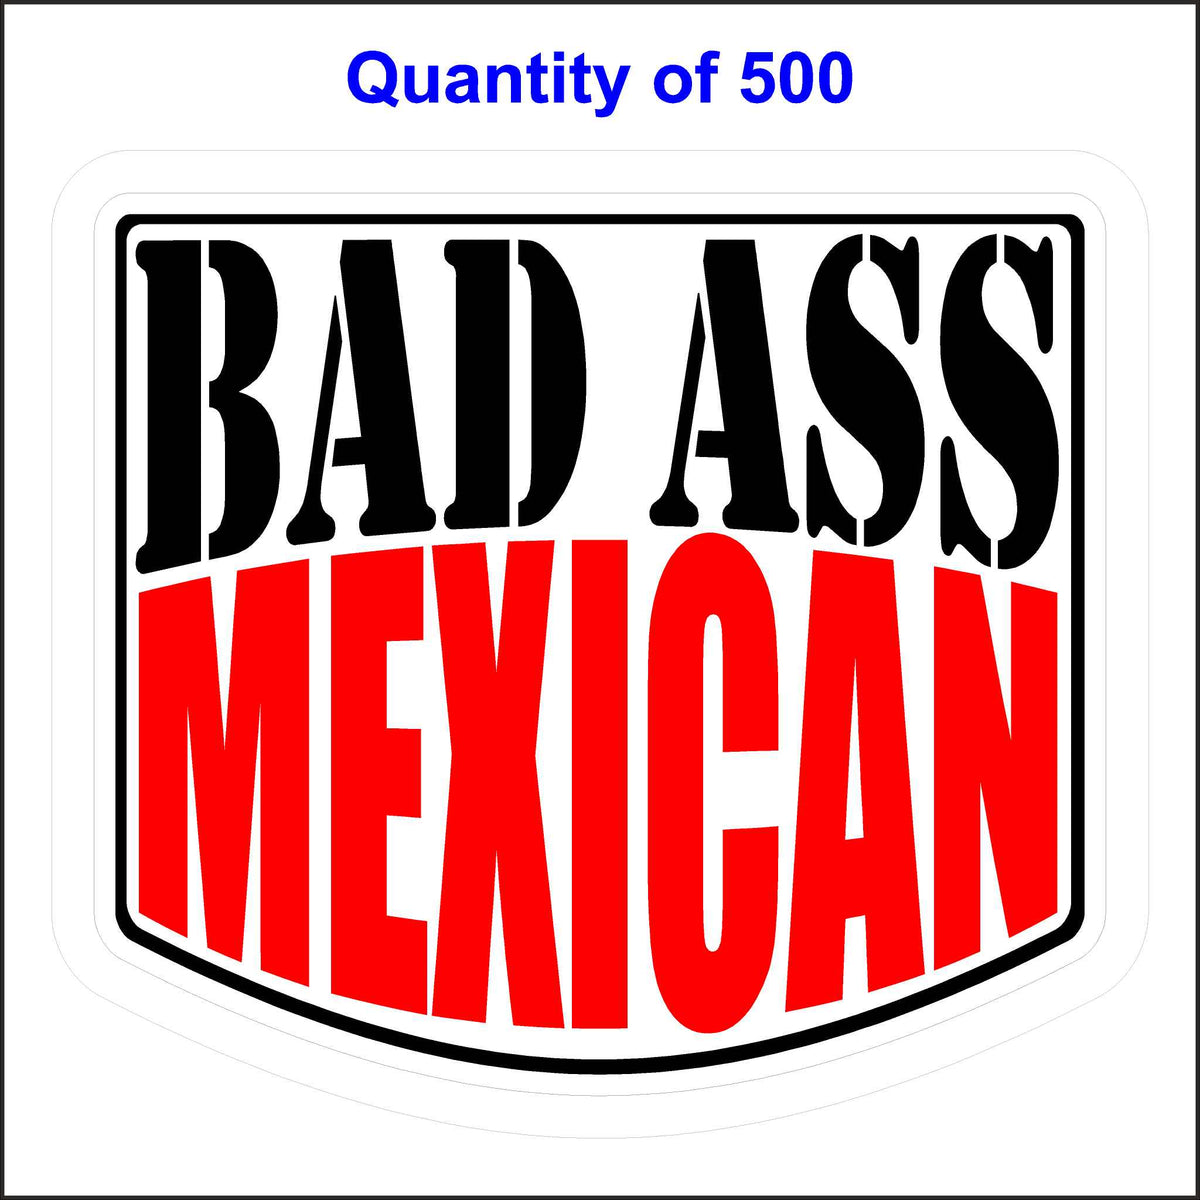 Bad Ass Mexican Stickers 500 Quantity.